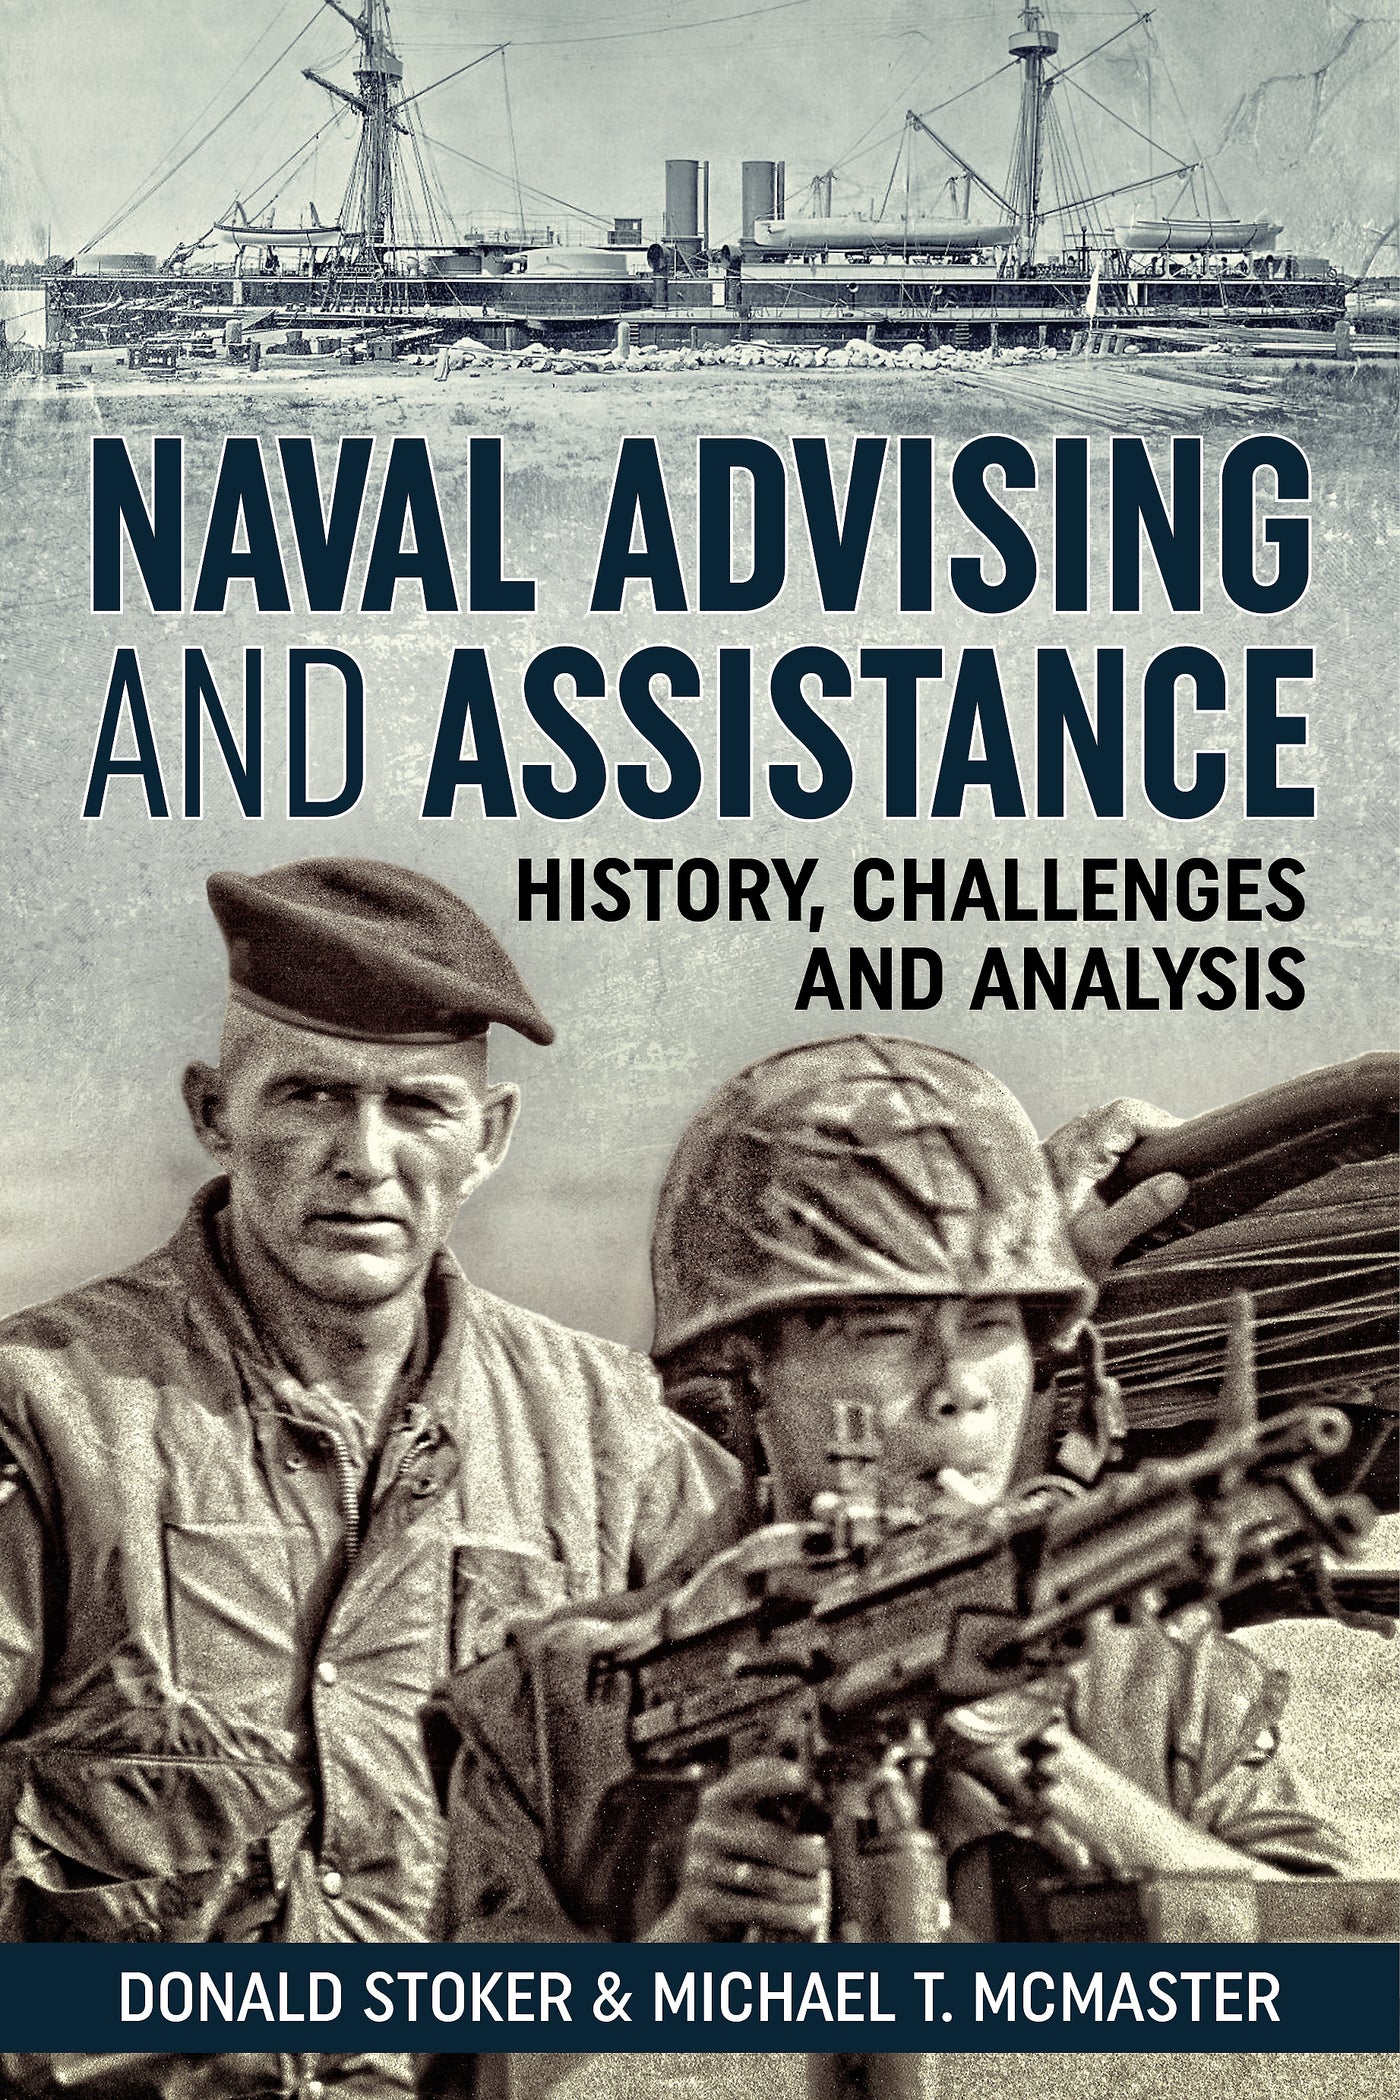 Naval Advising and Assistance